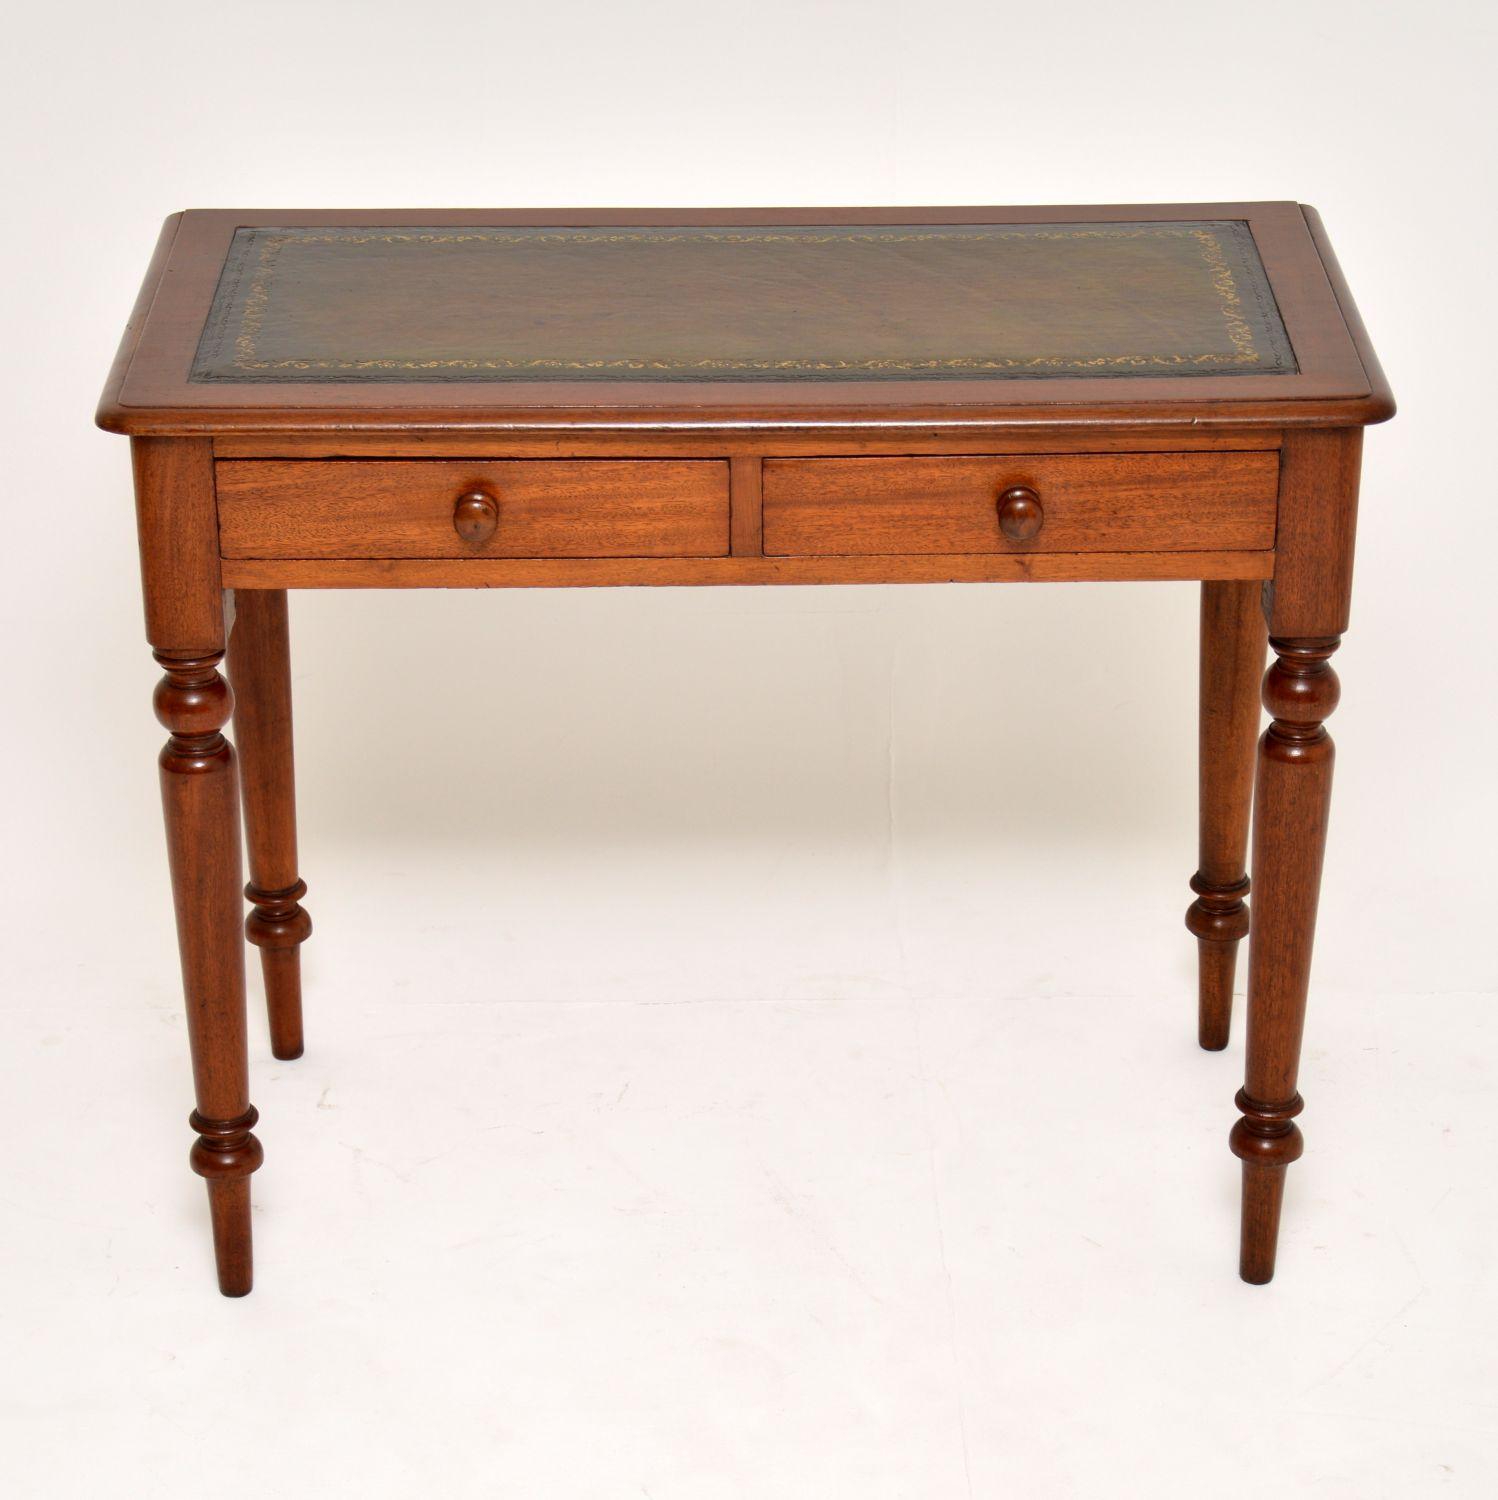 Antique Victorian mahogany writing table with a tooled leather writing surface. It’s in very good original condition and dates to circa 1860-1880s period. There are two drawers with turned bun handles and it sits on turned legs.

Measures: Width –